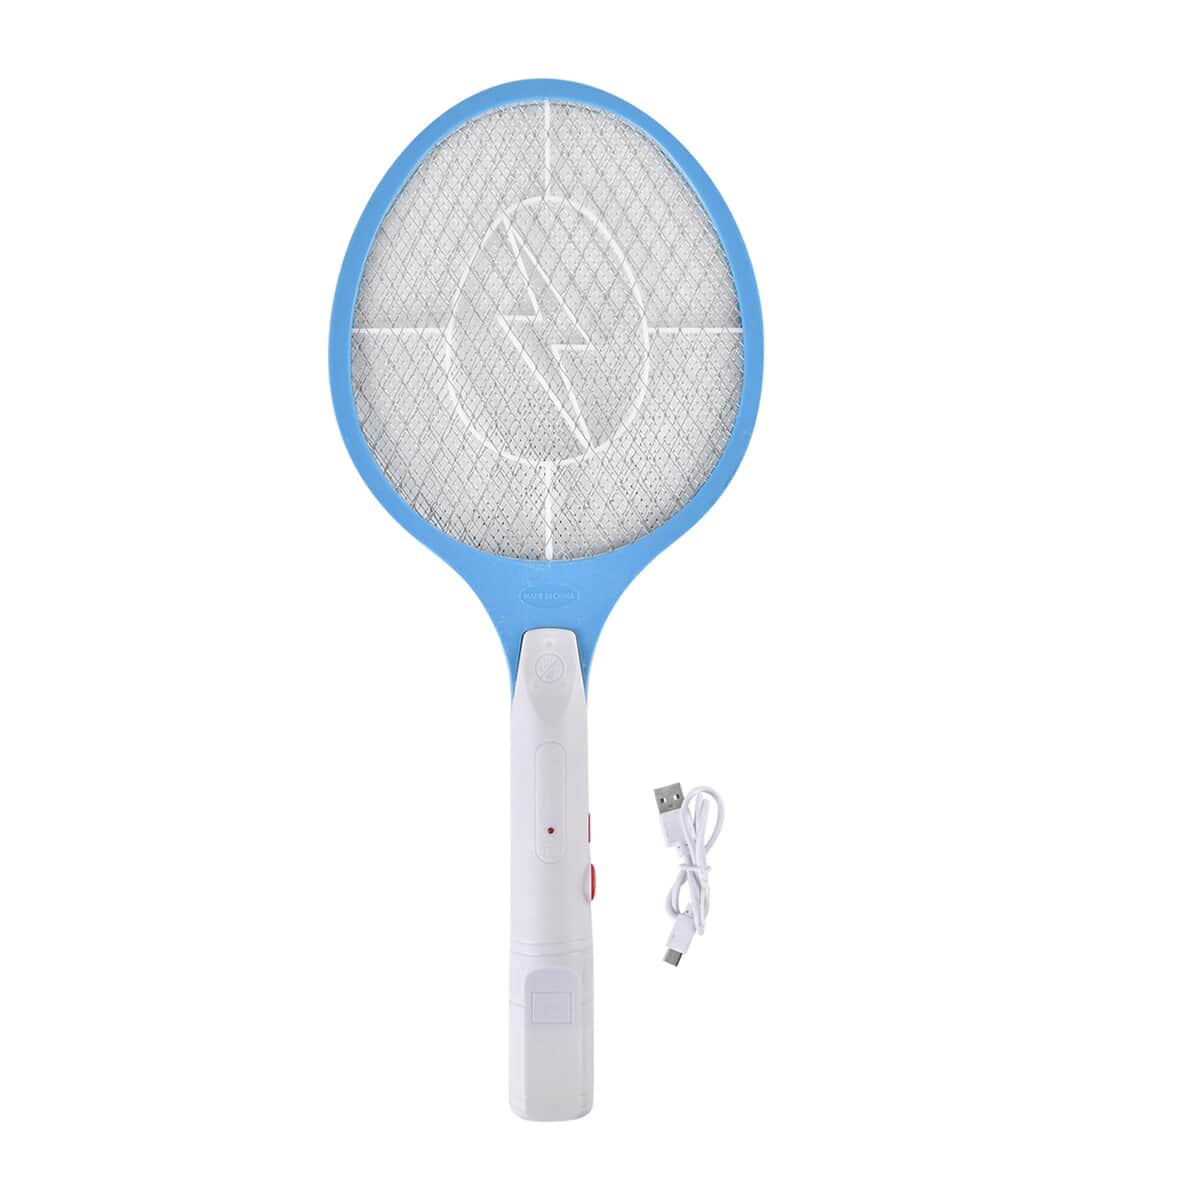 Rechargeable Handheld Zapper Mosquito Swatter - Blue (Powered by USB Cable) (19.6") image number 3